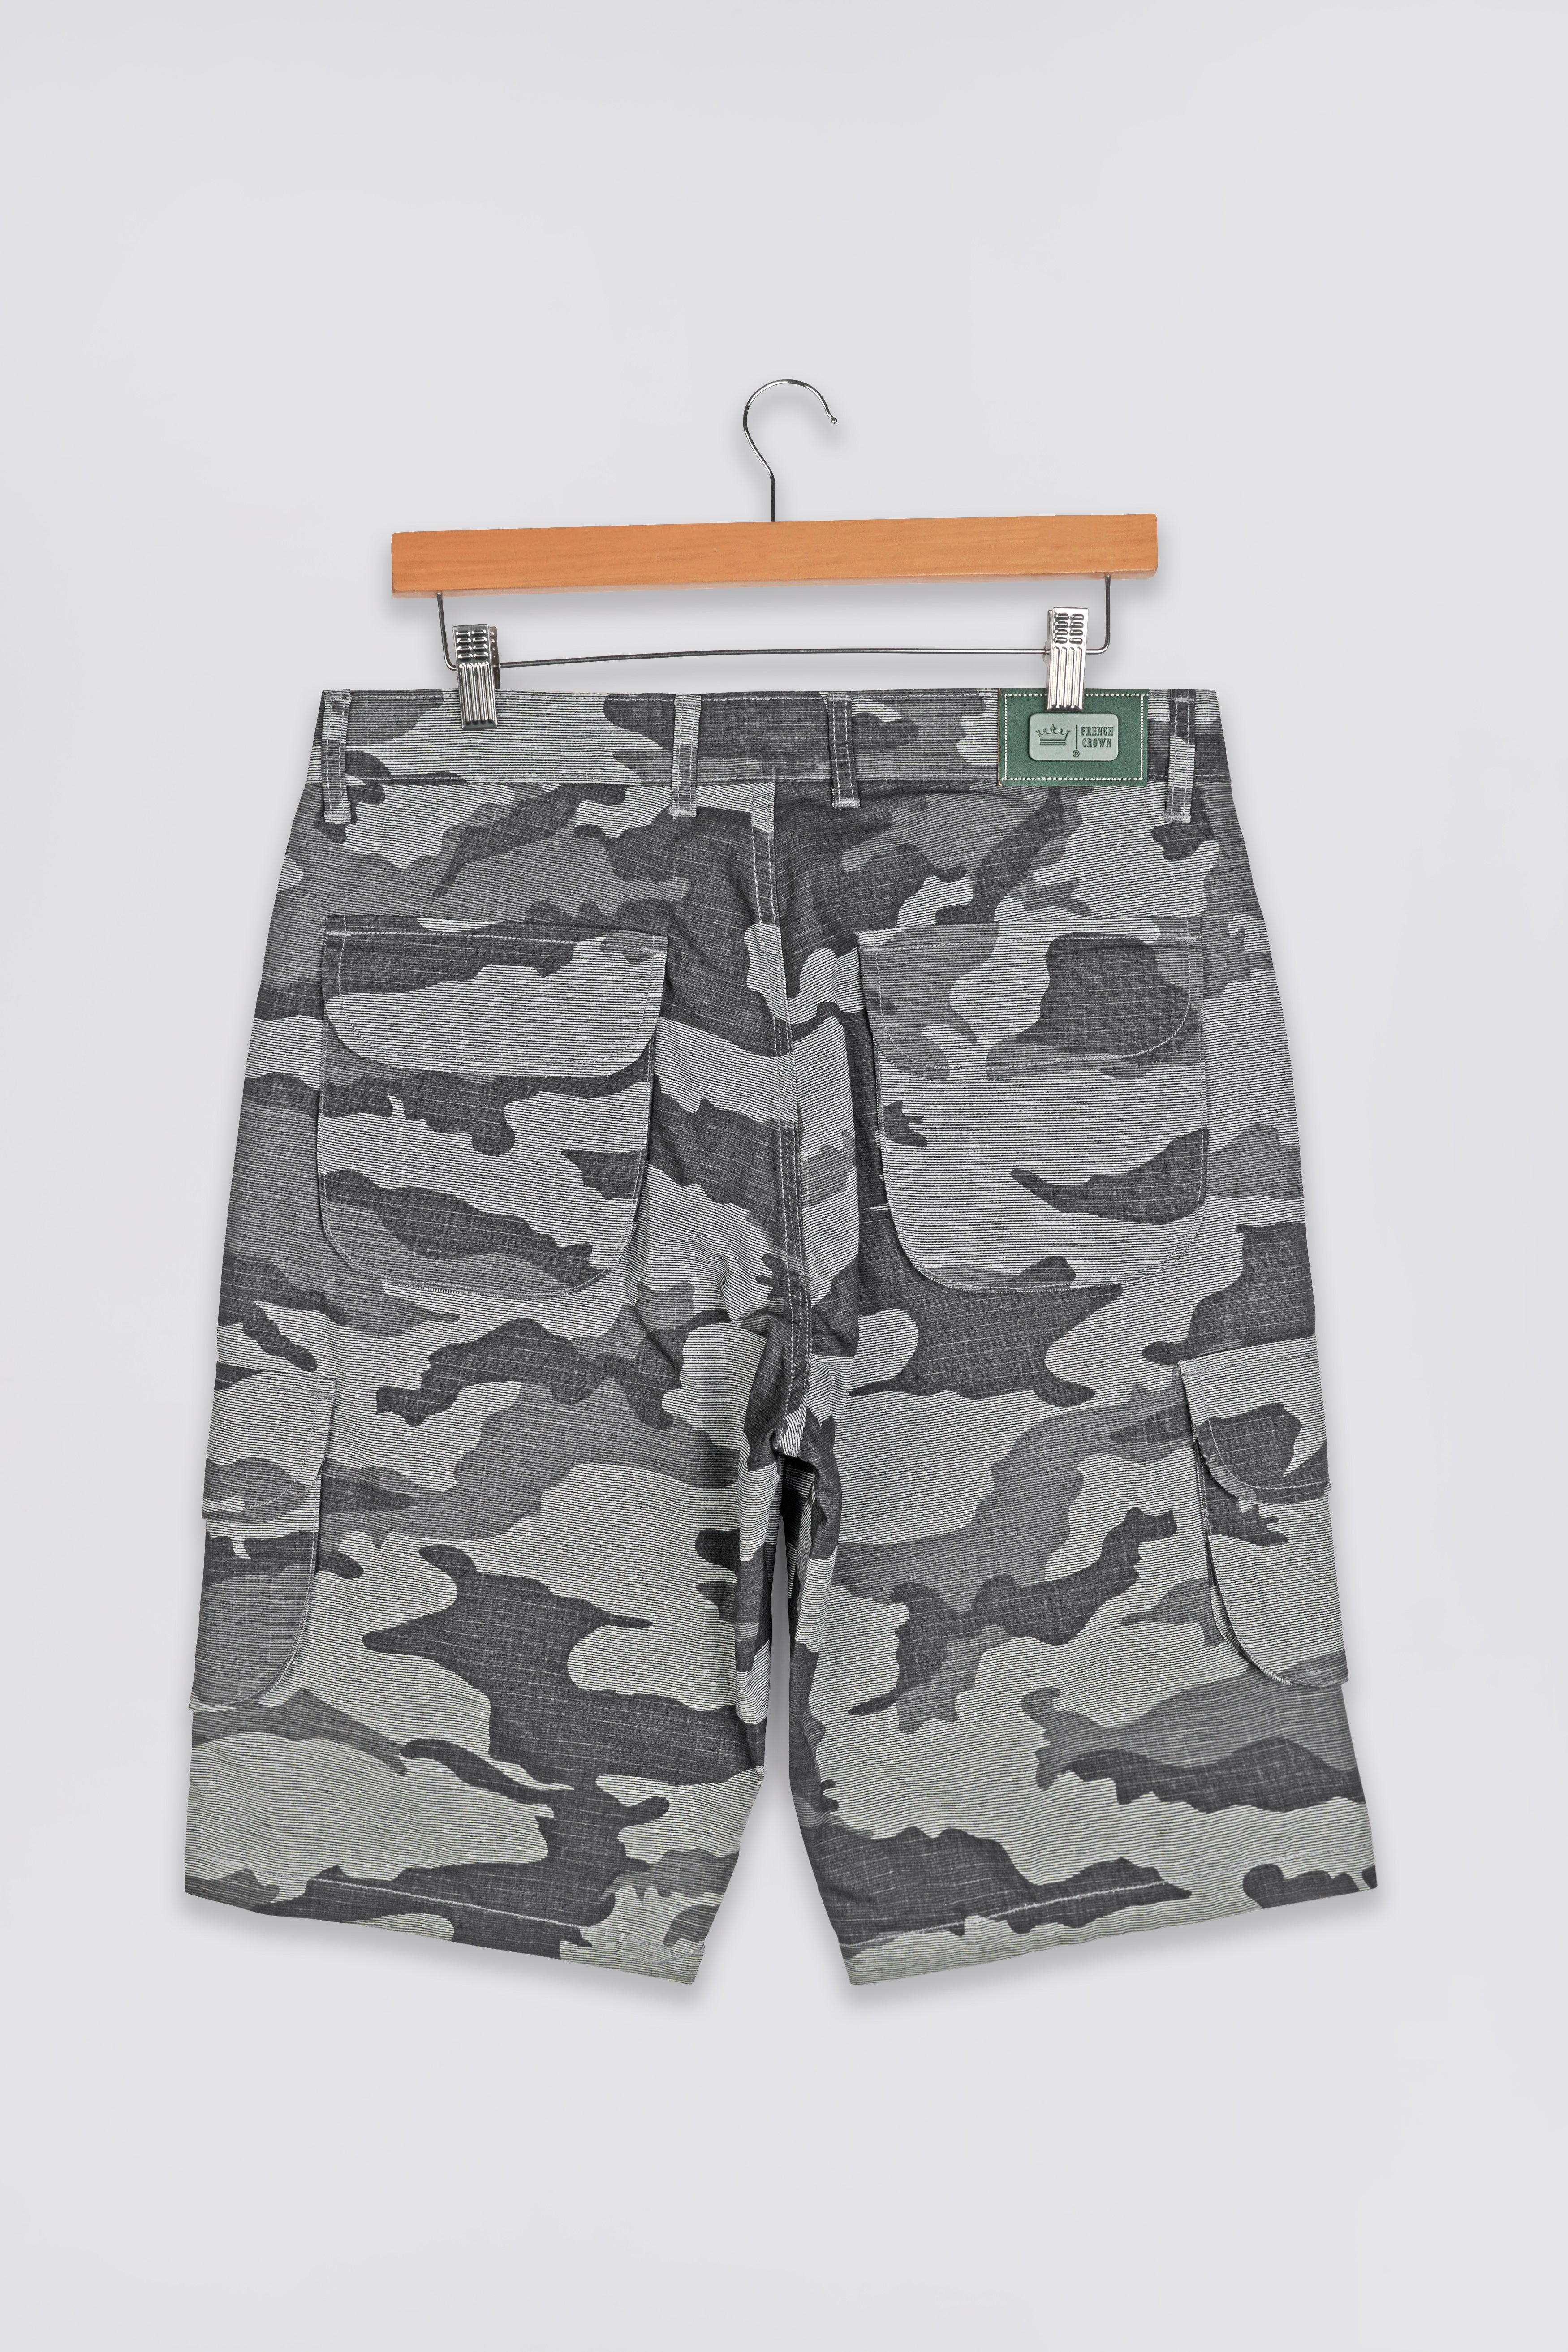 Abbey Gray and White Camouflage Cargo Shorts SR271-28, SR271-30, SR271-32, SR271-34, SR271-36, SR271-38, SR271-40, SR271-42, SR271-44